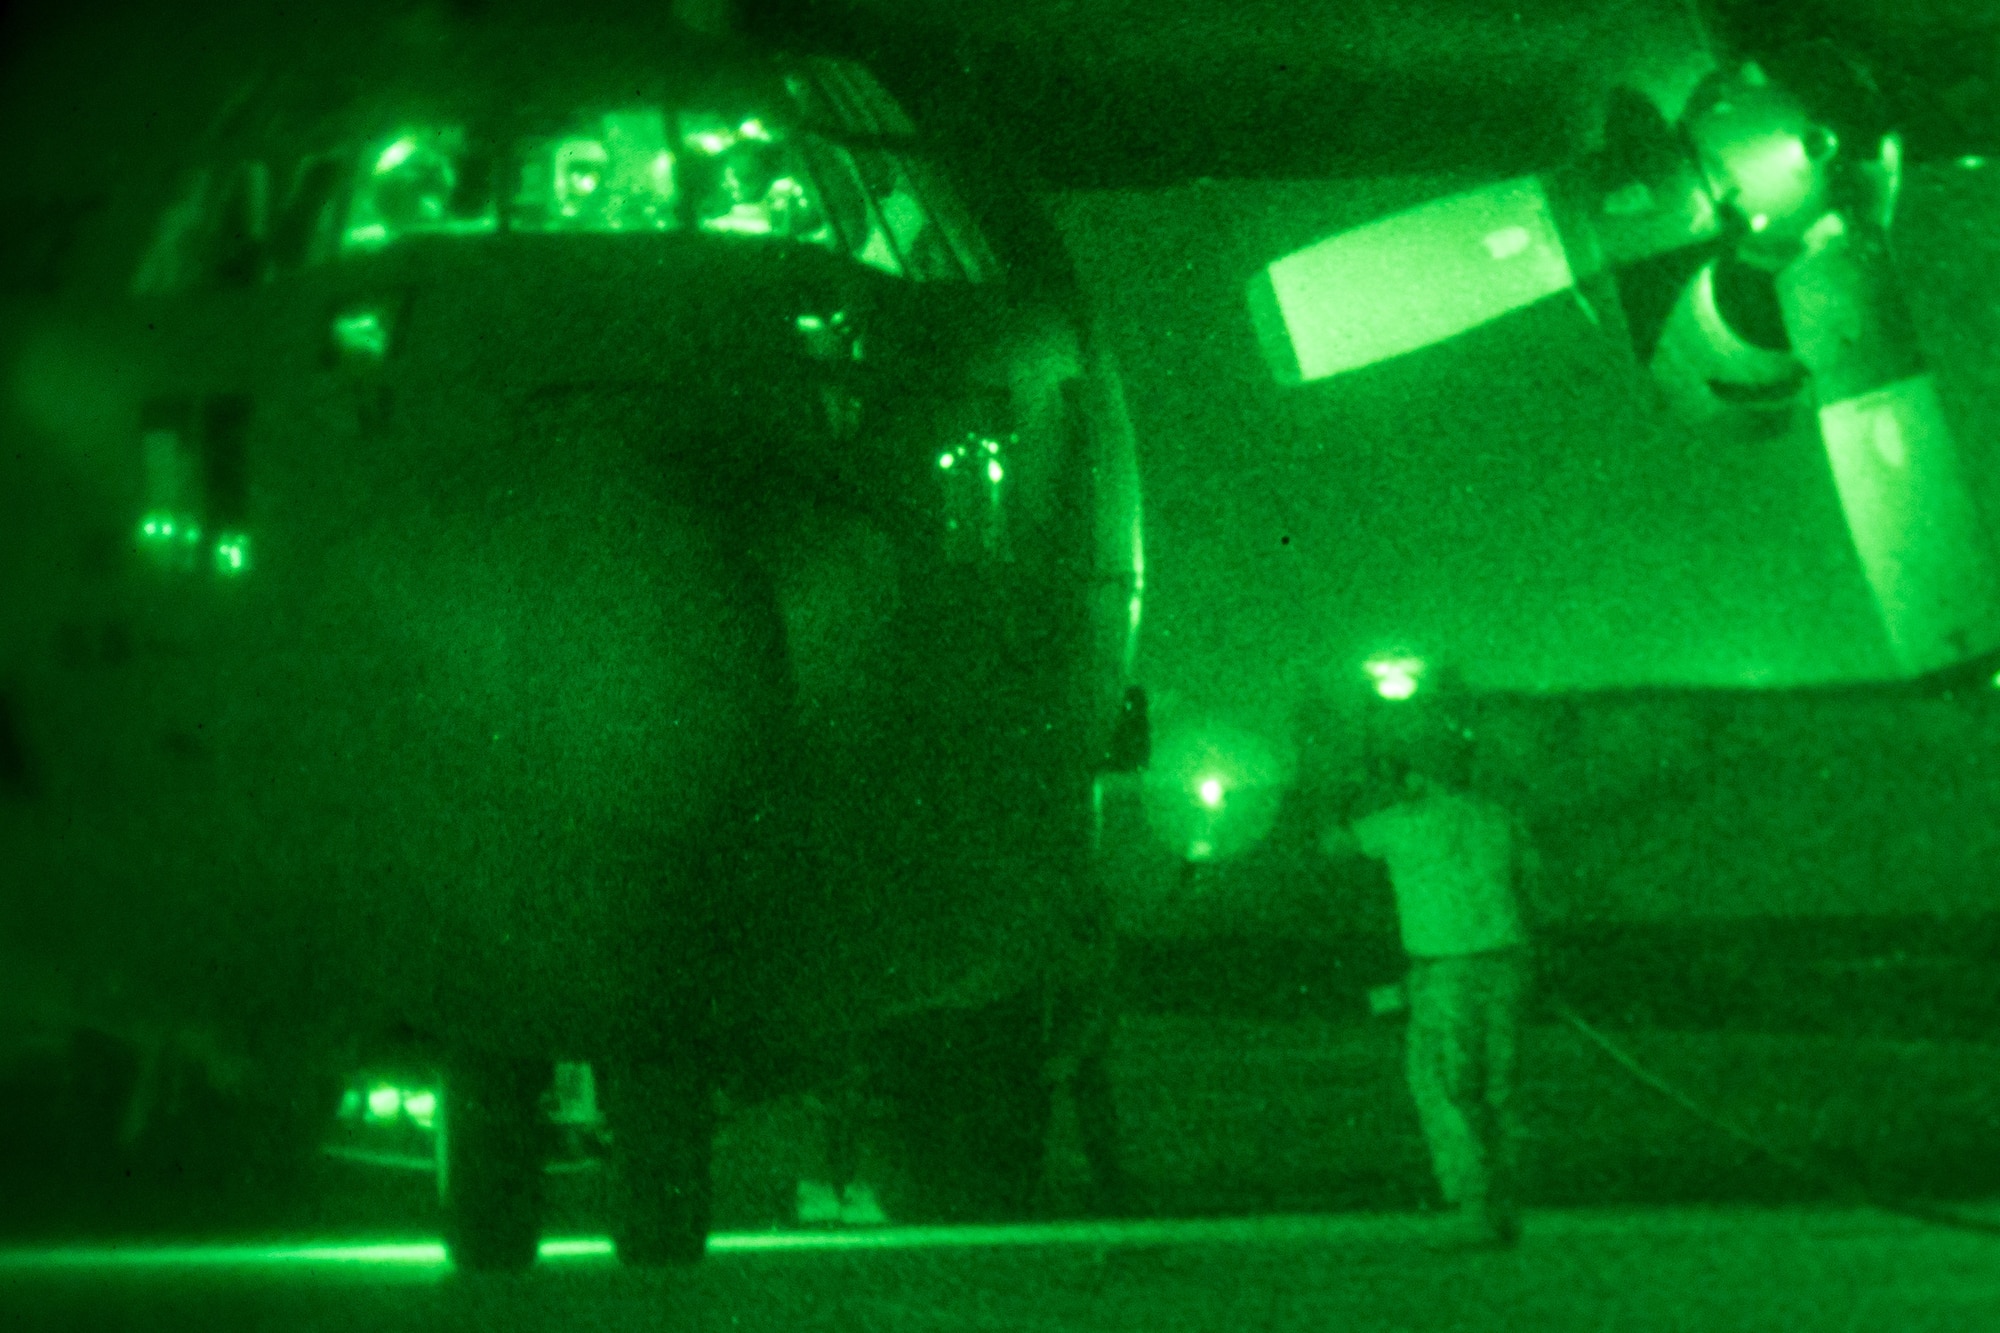 A 181st Airlift Squadron crew chief connects power to a C-130 during night vision operations July 25, 2018, at Naval Air Station Fort Worth Joint Reserve Base, Texas. The crew practiced night vision-assisted takeoff and landing procedures to demonstrate standard operating and emergency procedures to members of the wing’s Chilean Air Force State Partners. (U.S. Air National Guard photo by Tech. Sgt. Lynn Means)